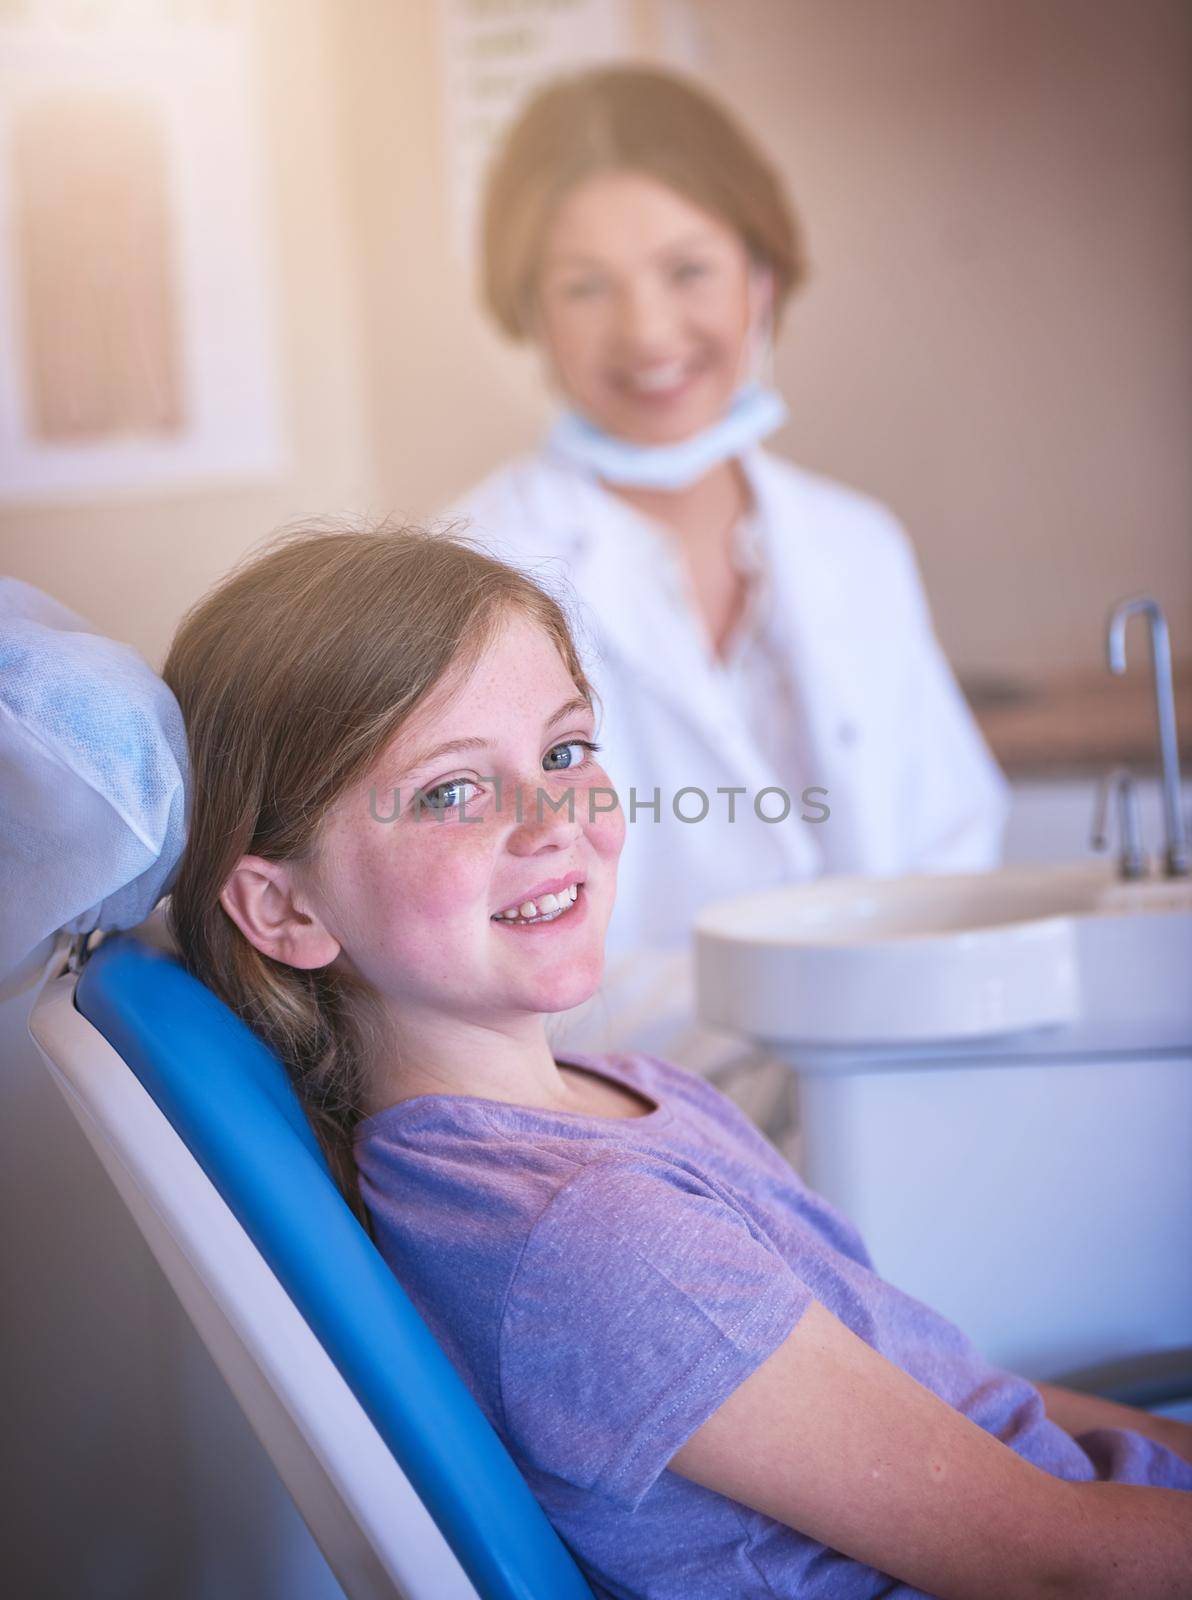 Dentist visits are actually quite fun. a little girl at the dentist for a checkup